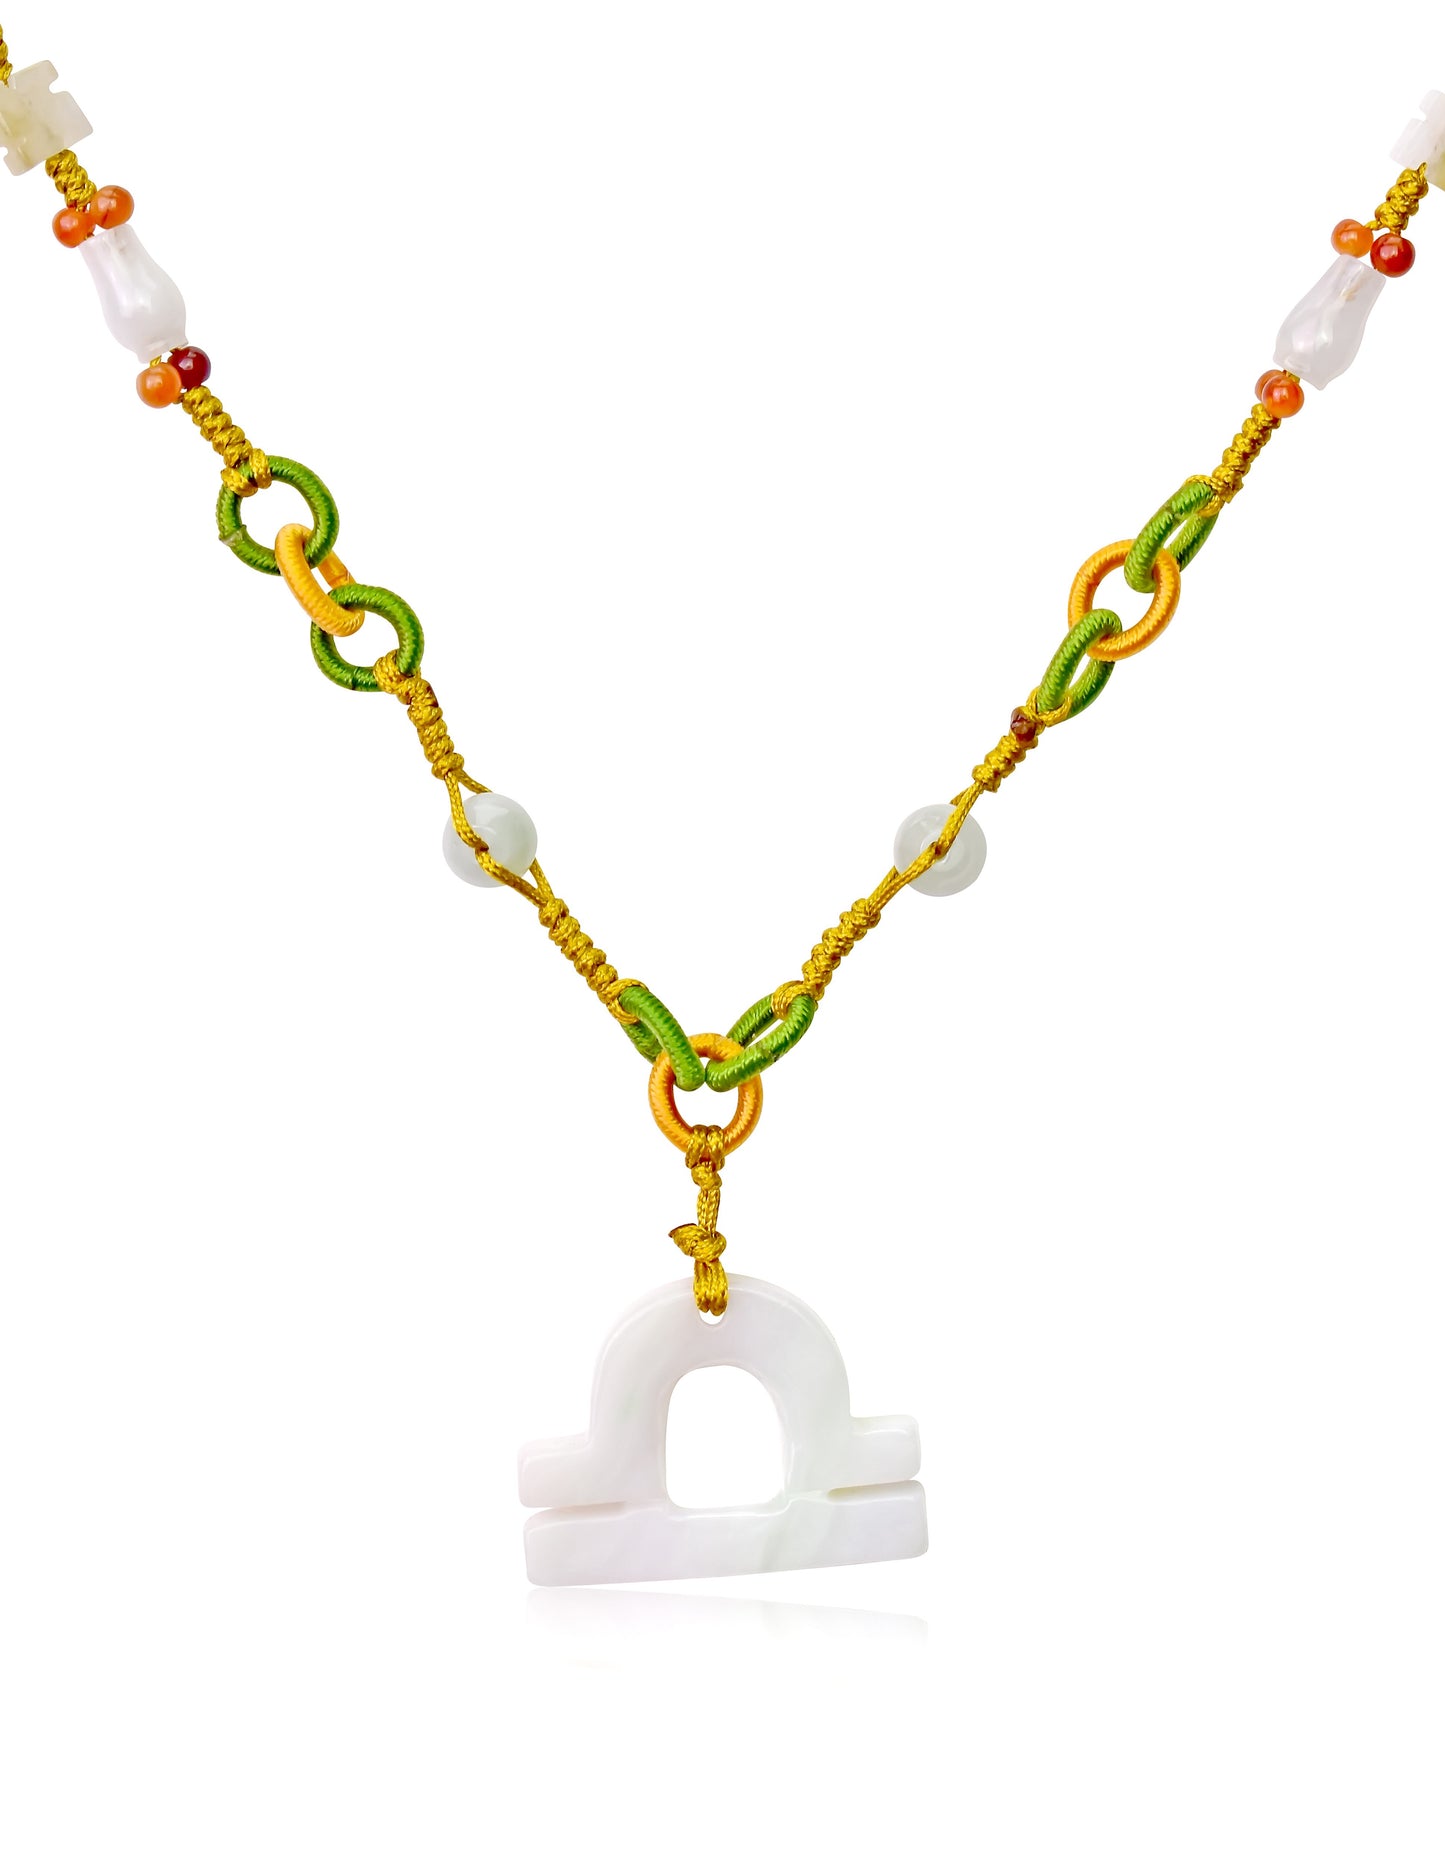 Get the Perfect Get the Perfect Gift for the Libra in Your Life with Jade Necklace made with Yellow Cord